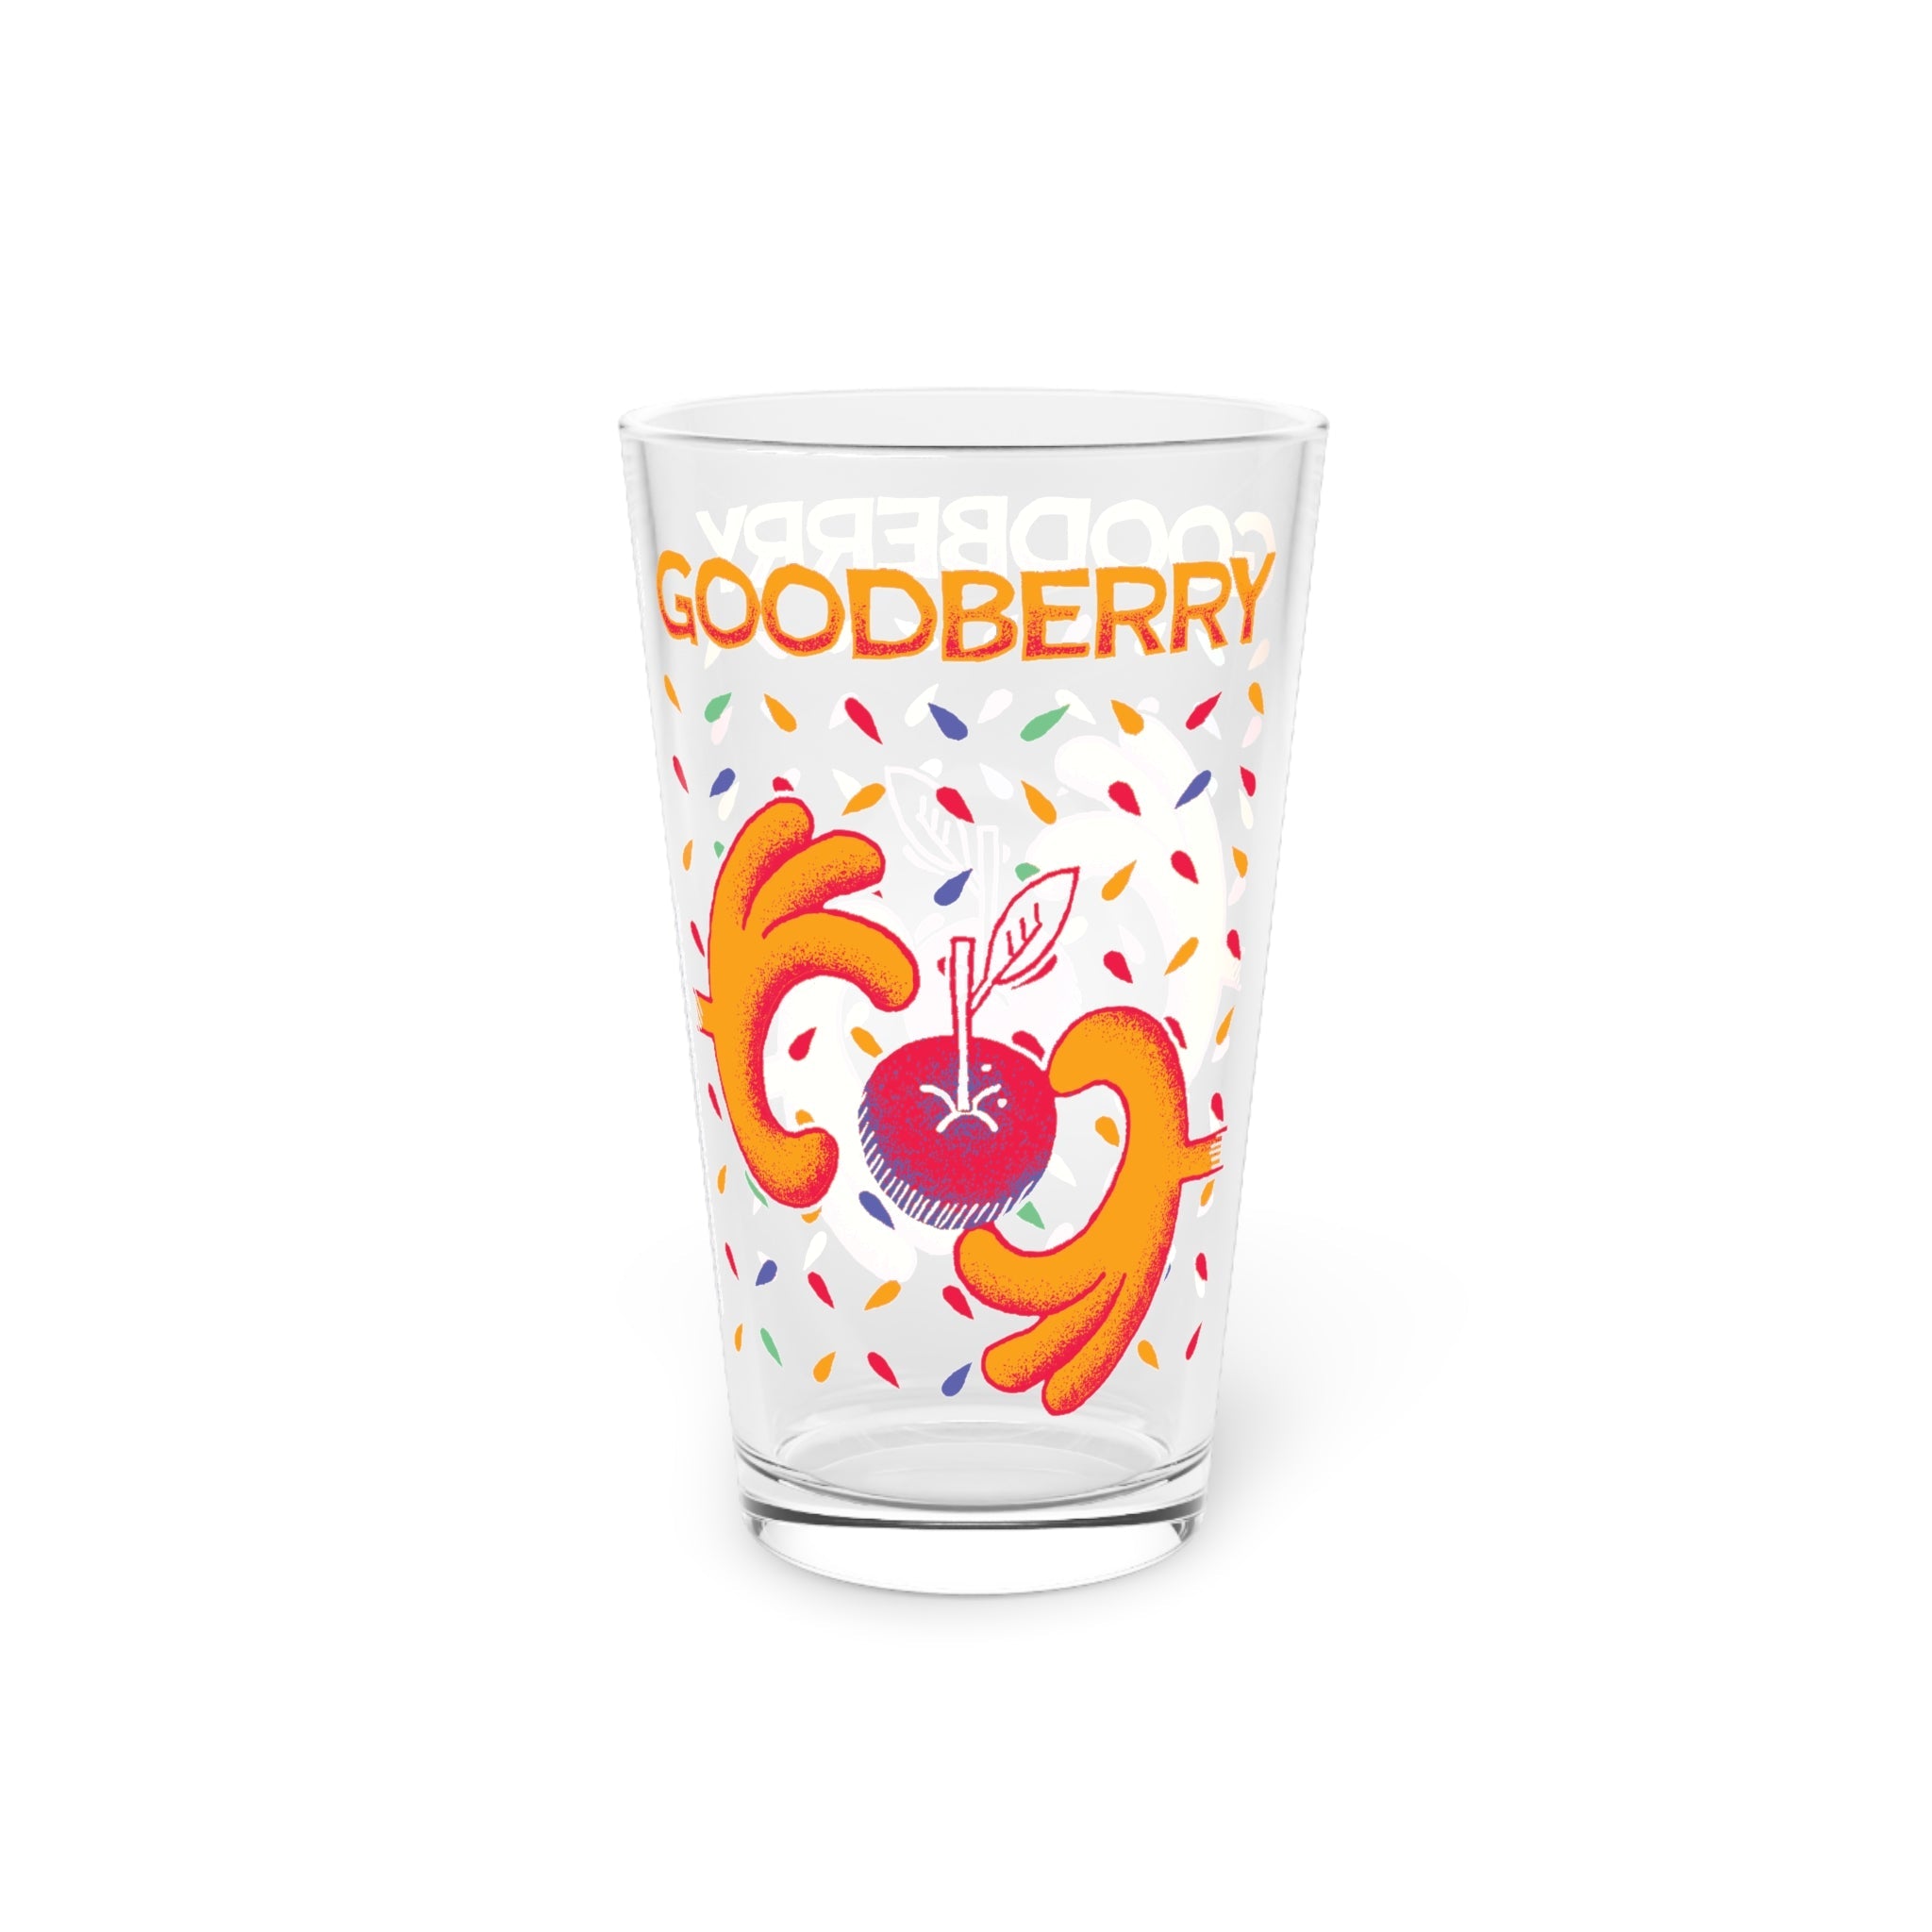 Goodberry | Pint Glass, 16oz - Drinkware Sets - Ace of Gnomes - 24631957469318770495